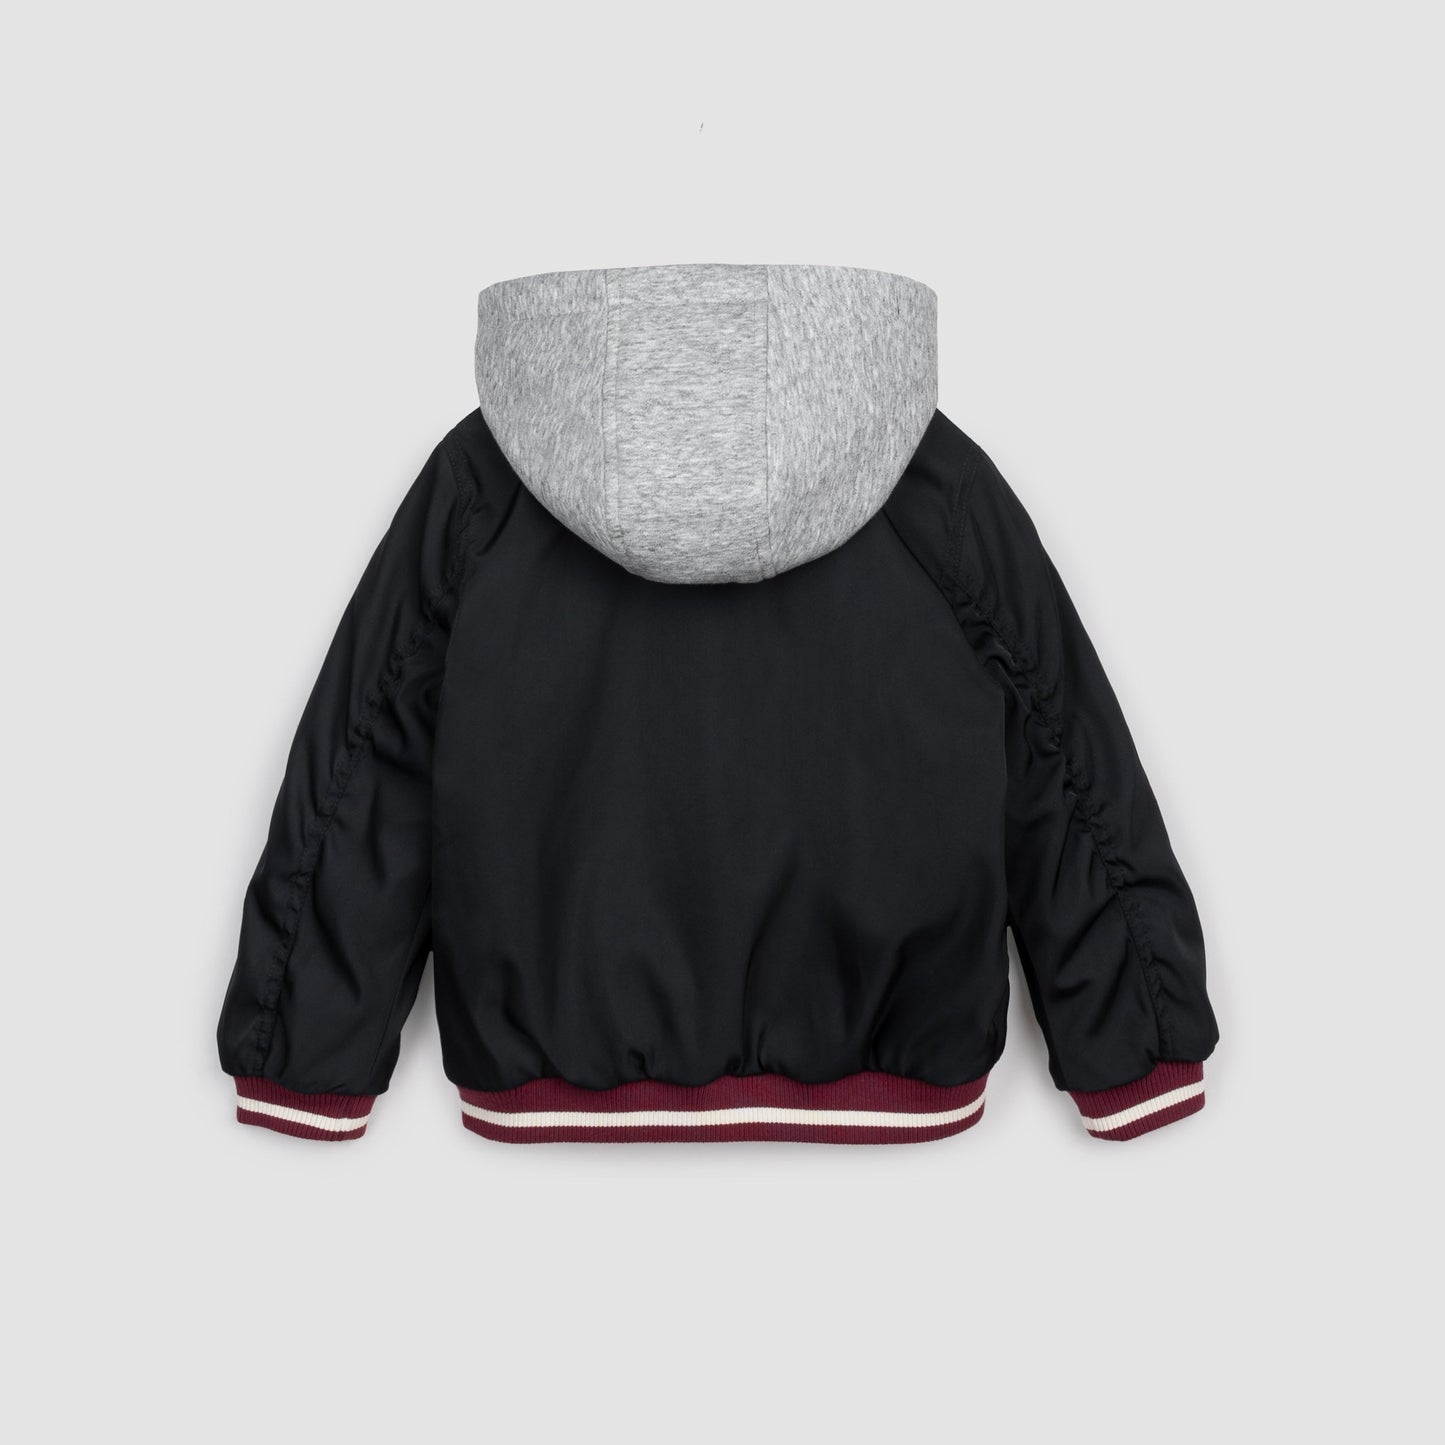 Lined Bomber Jacket/Miles